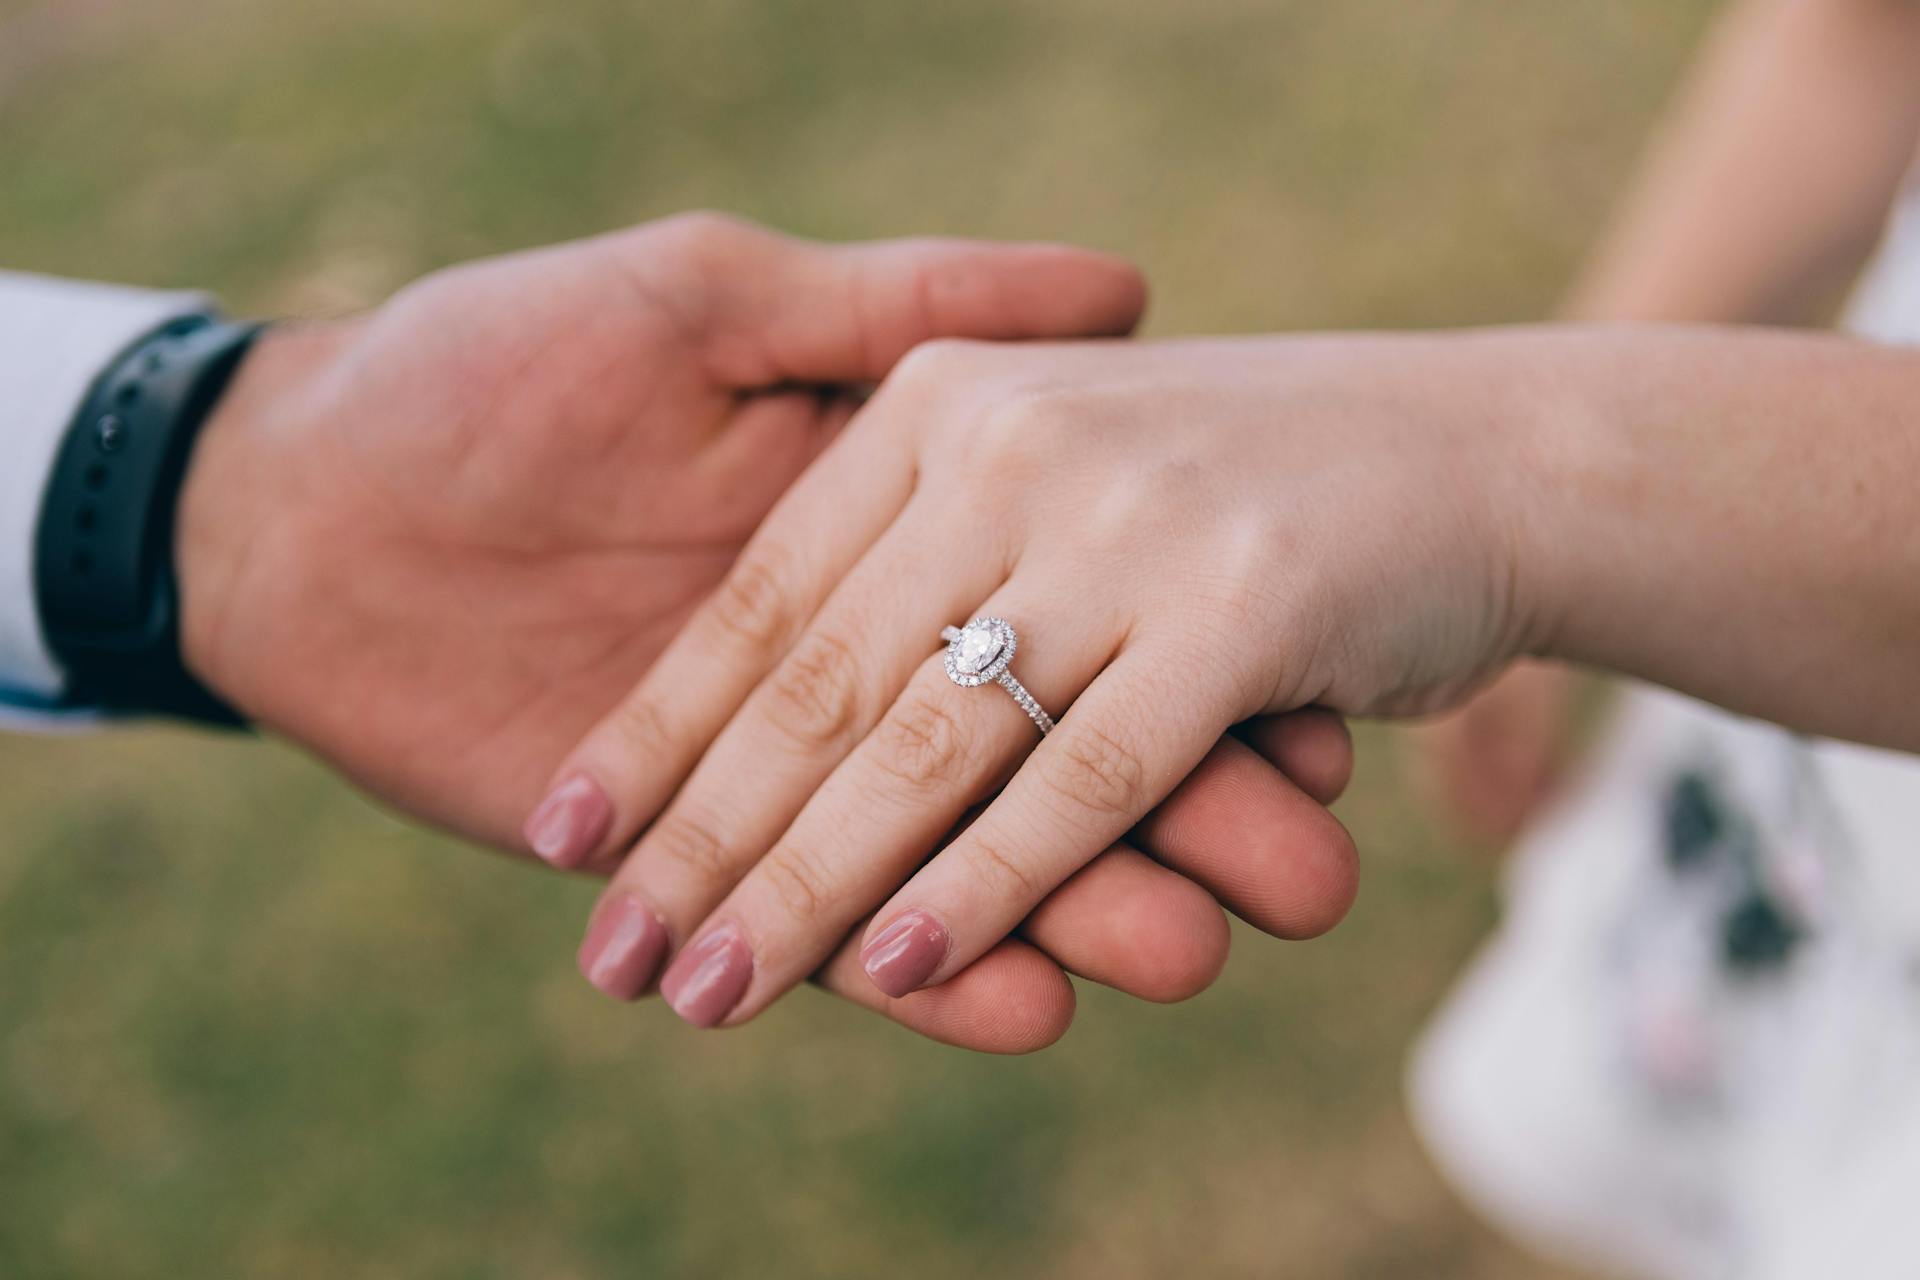 A photo of an engagement ring | Source: Pexels